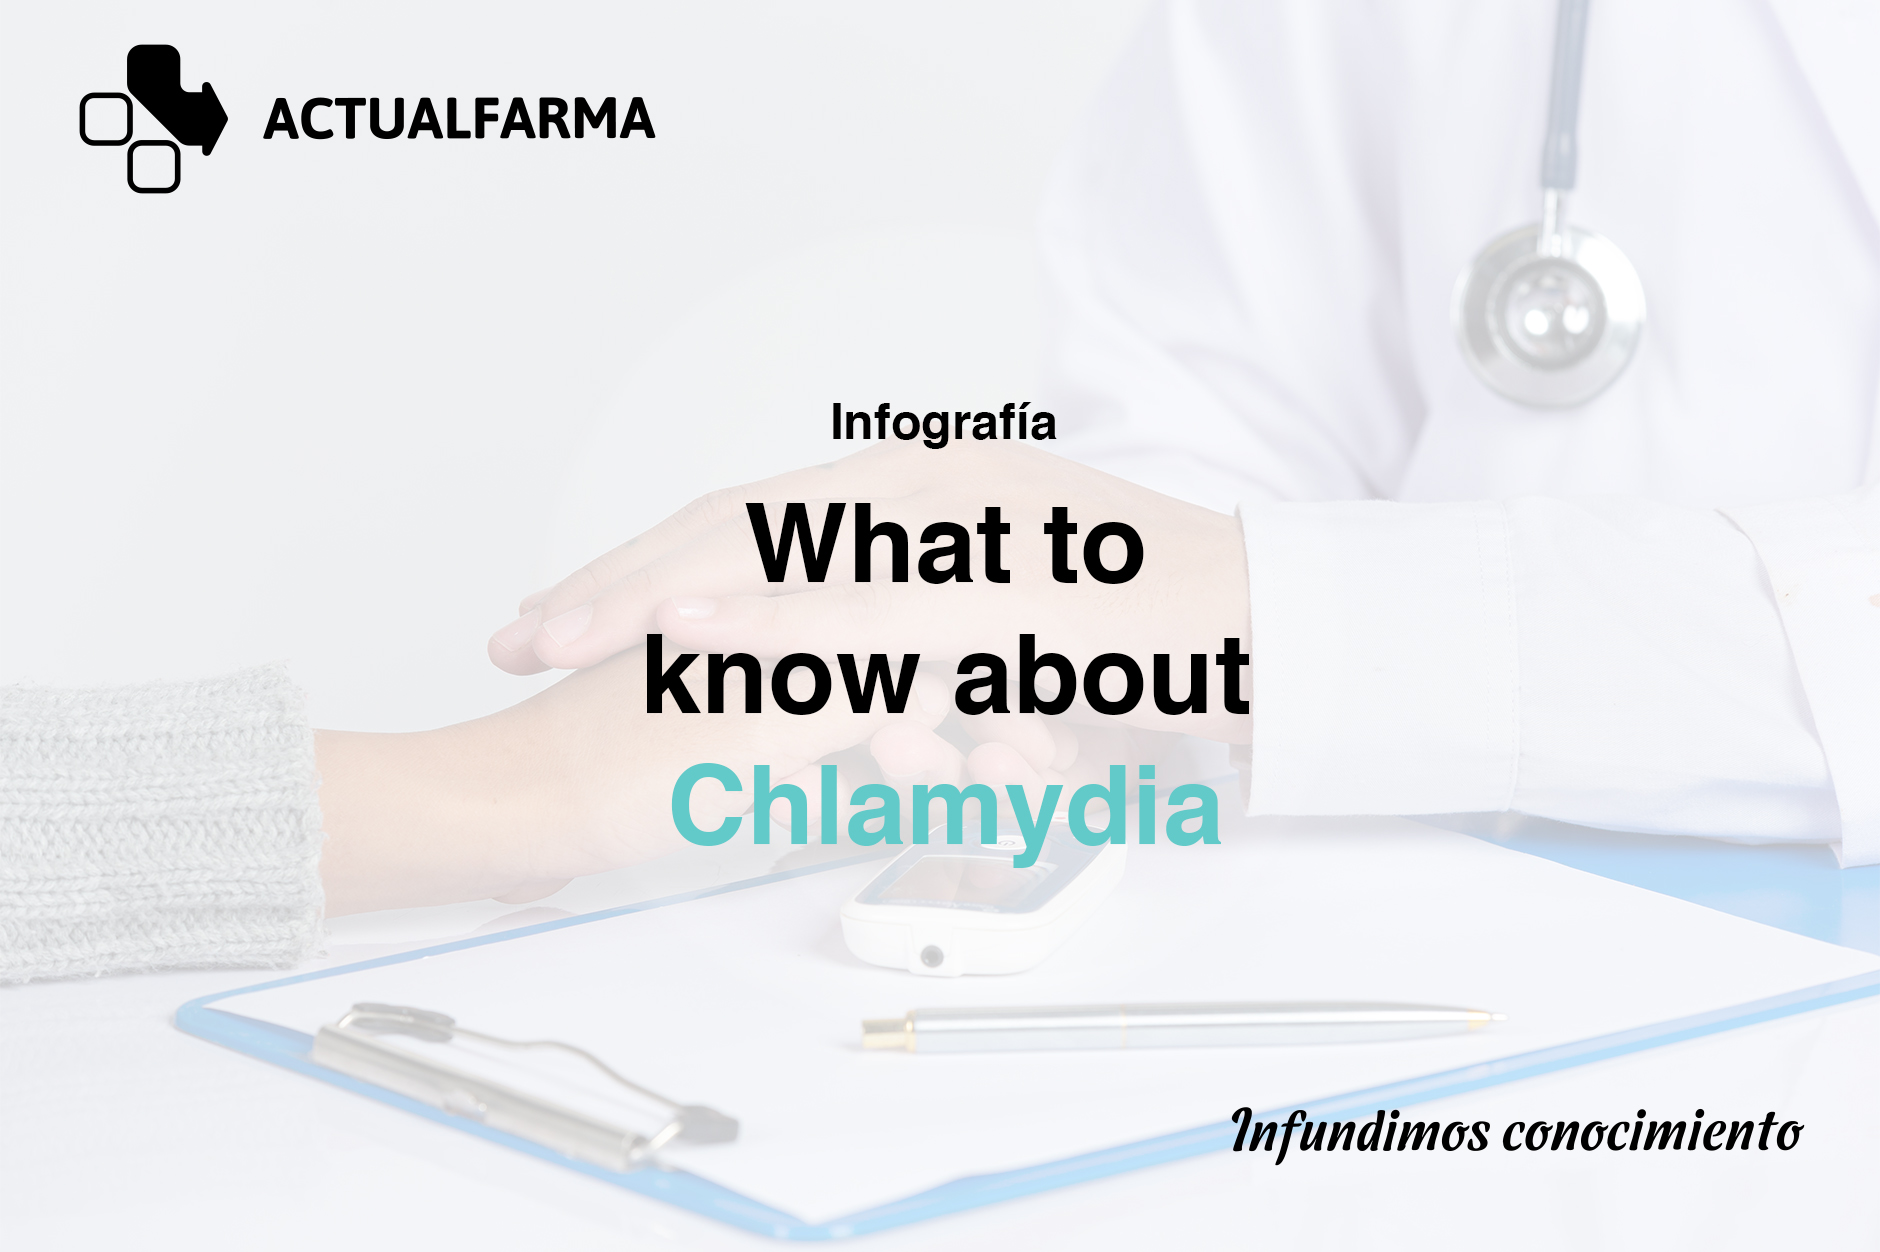 Review and infographic about Chlamydia